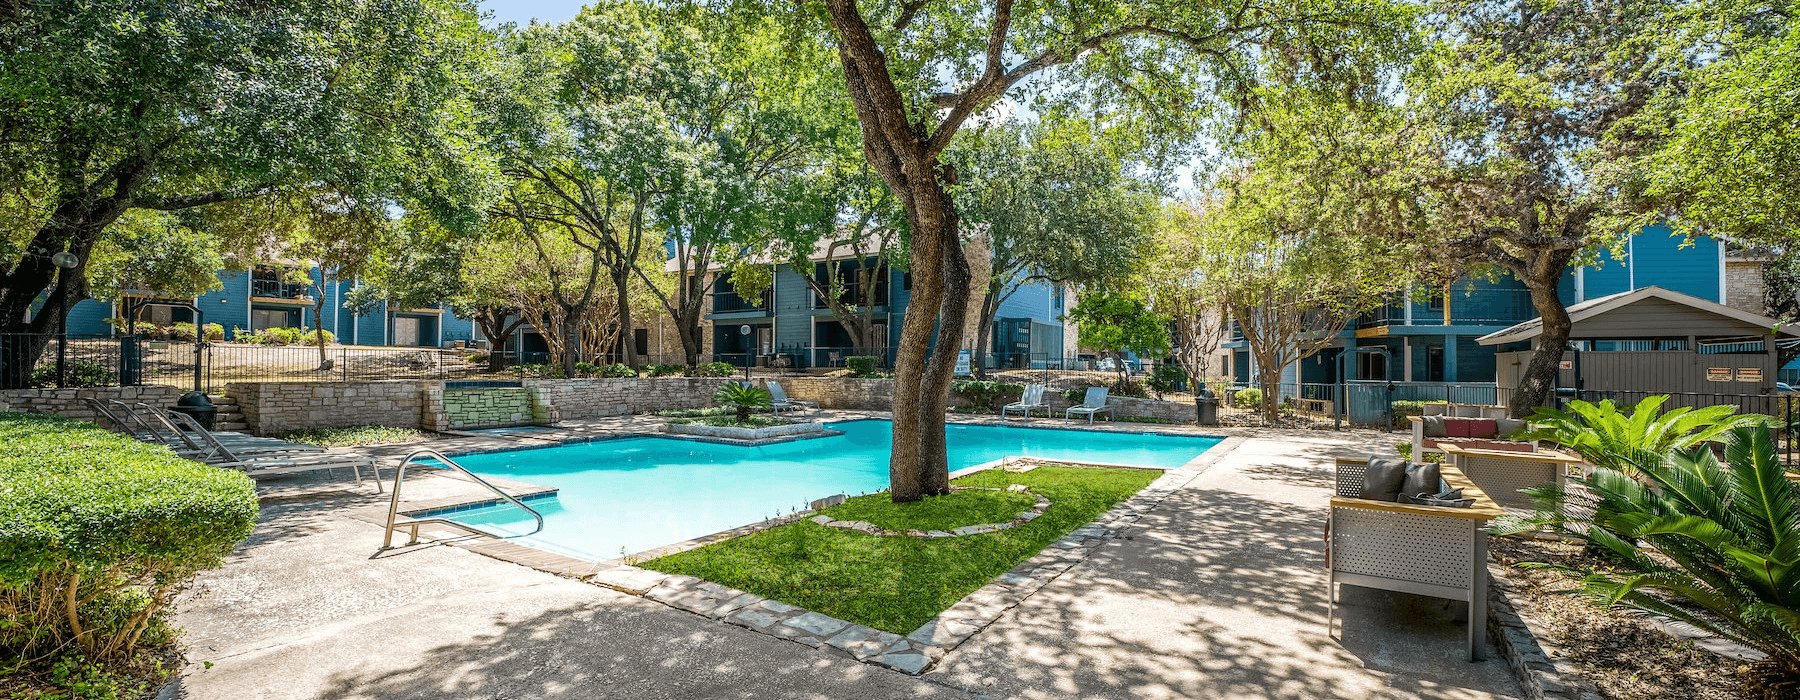 Outdoor pool area surrounded by mature trees and blue apartment buildings, with lounge chairs and patio furniture.